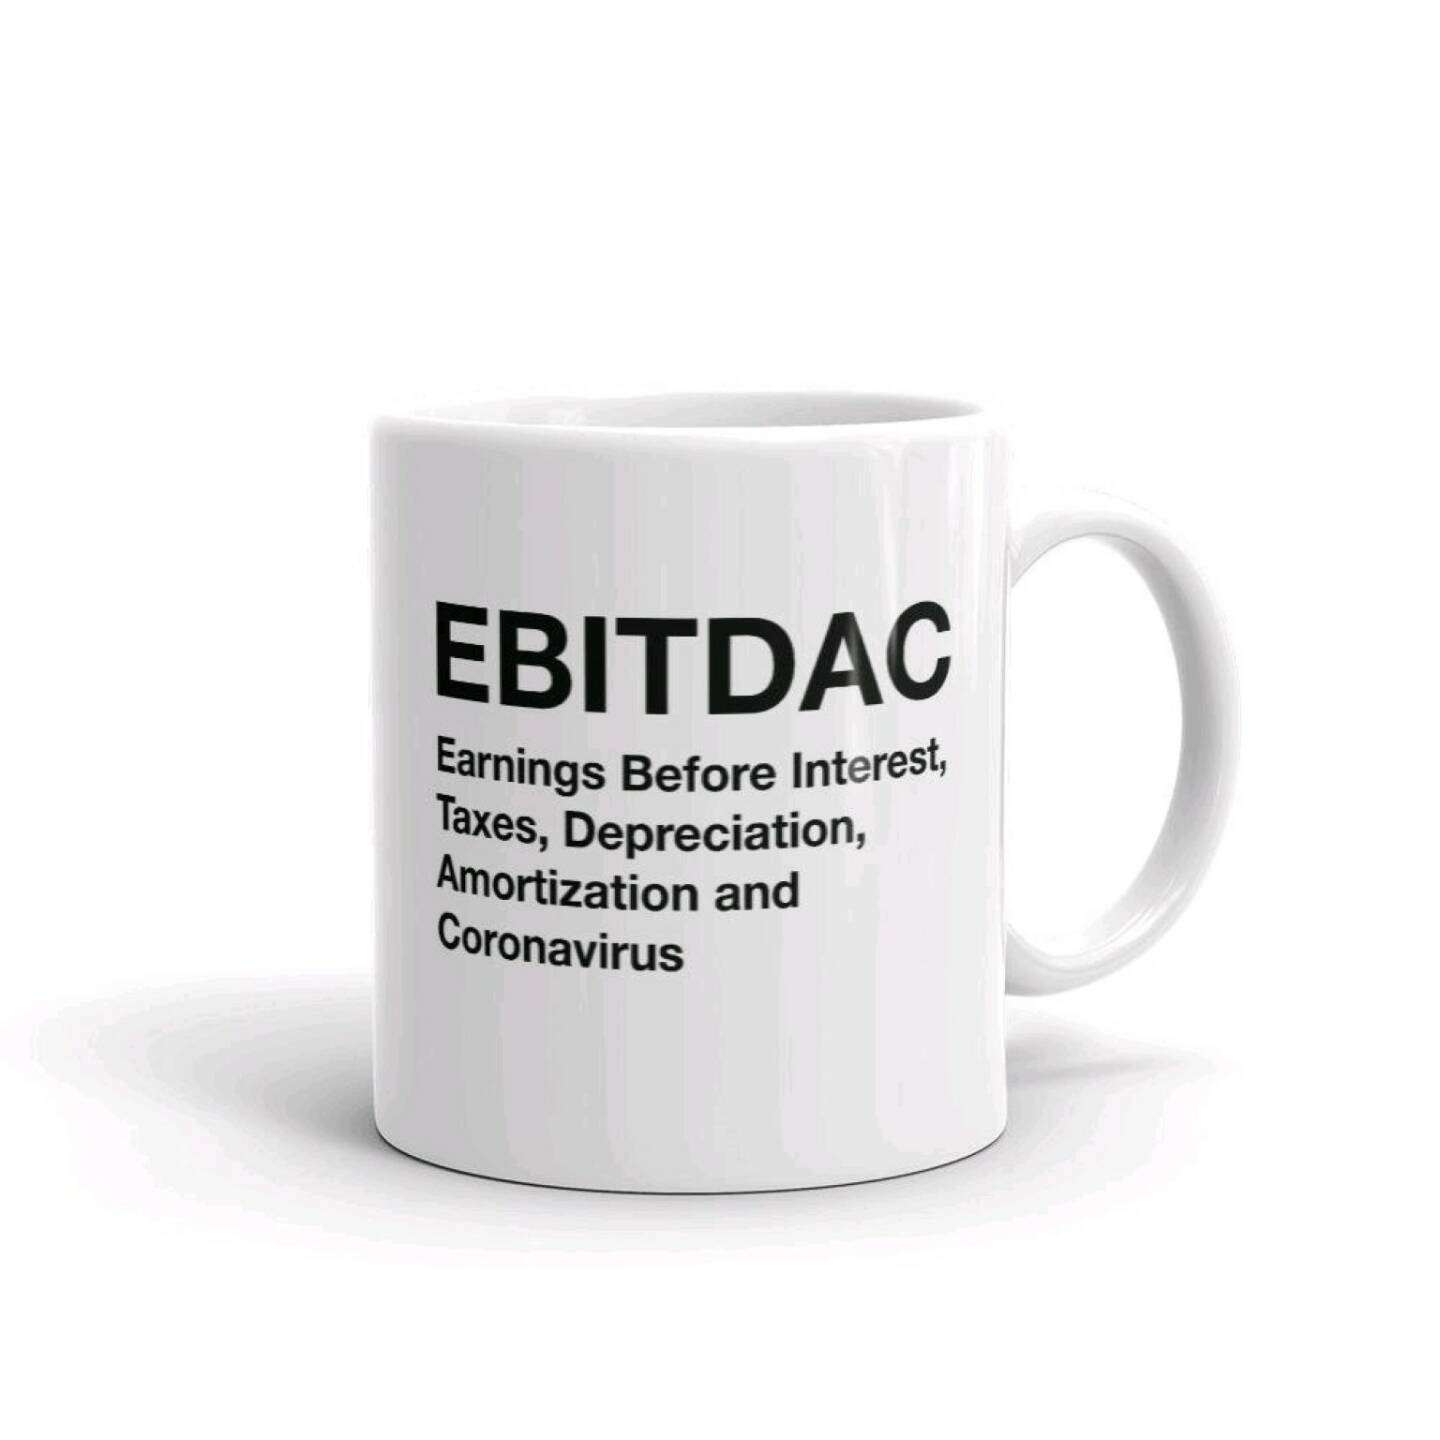 EBITDAC - earning before interest, taxes, depreciation, amortization and coronavirus (Diverse Quellen, zB https://twitter.com/NiceHappened/status/1251128818586095616/photo/1 )